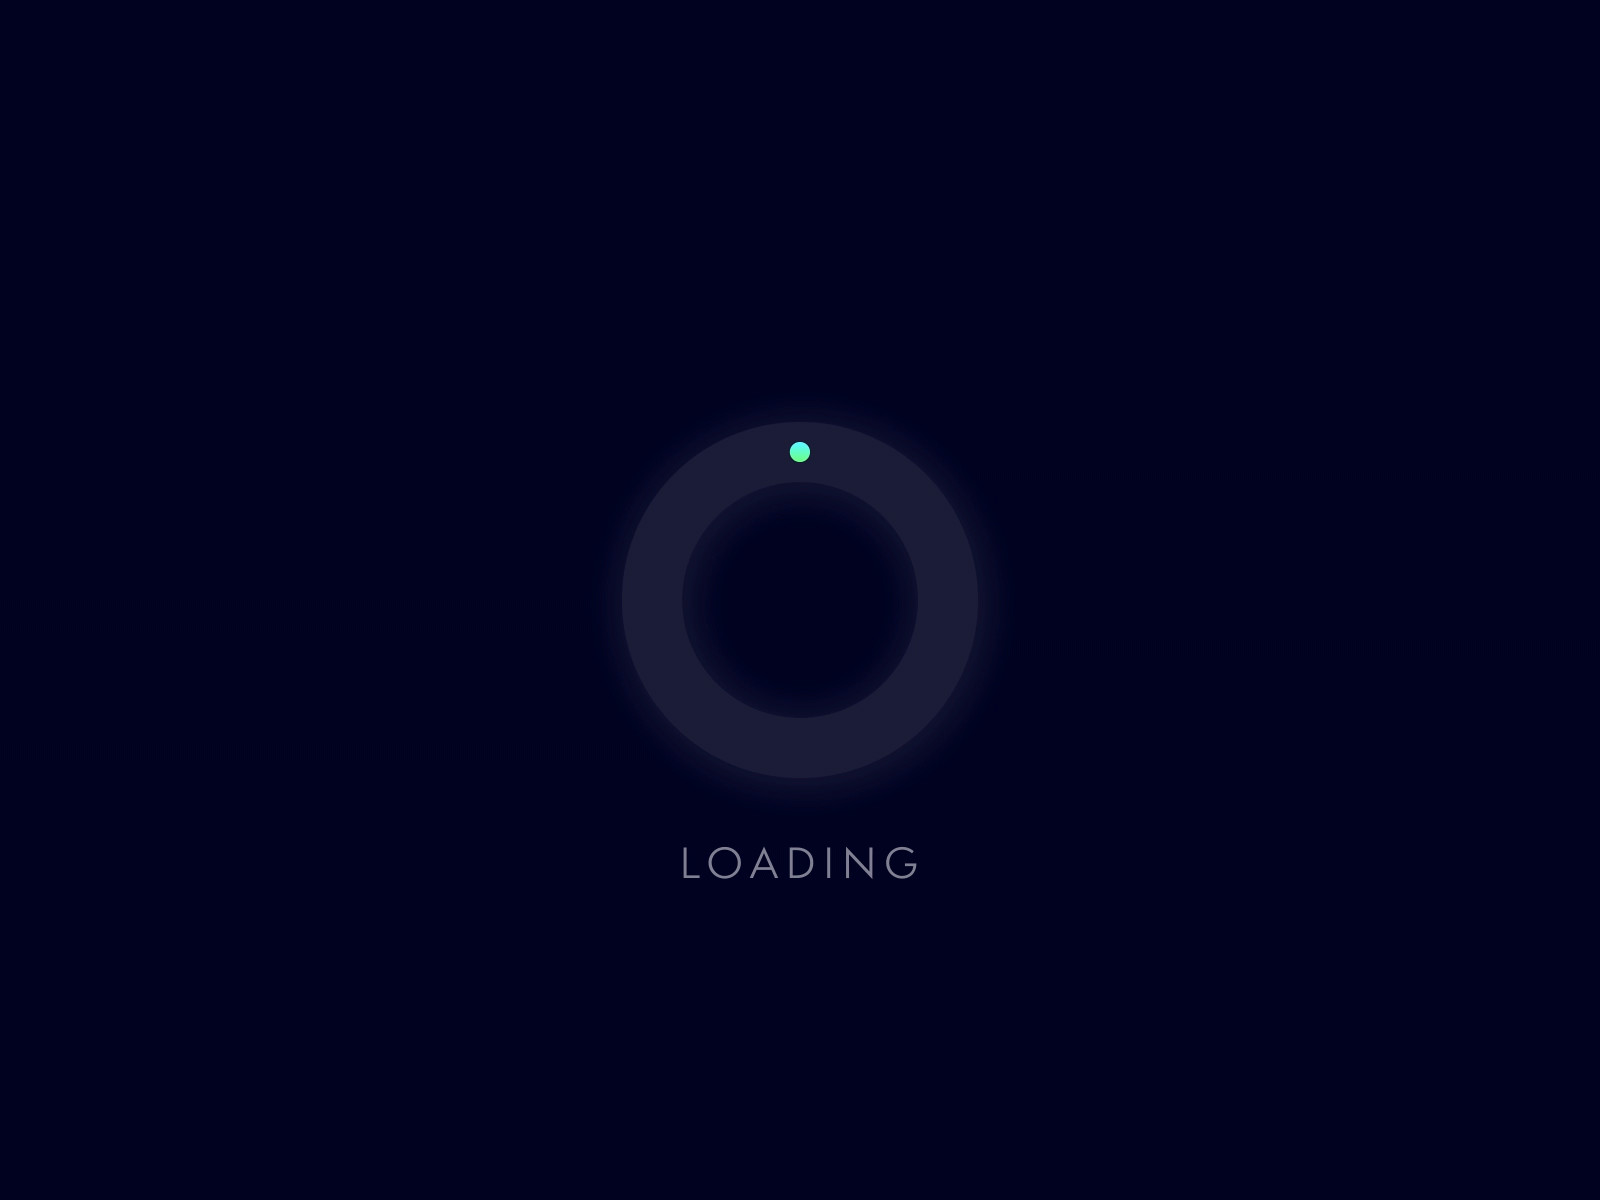 Video Loading Poster Blue